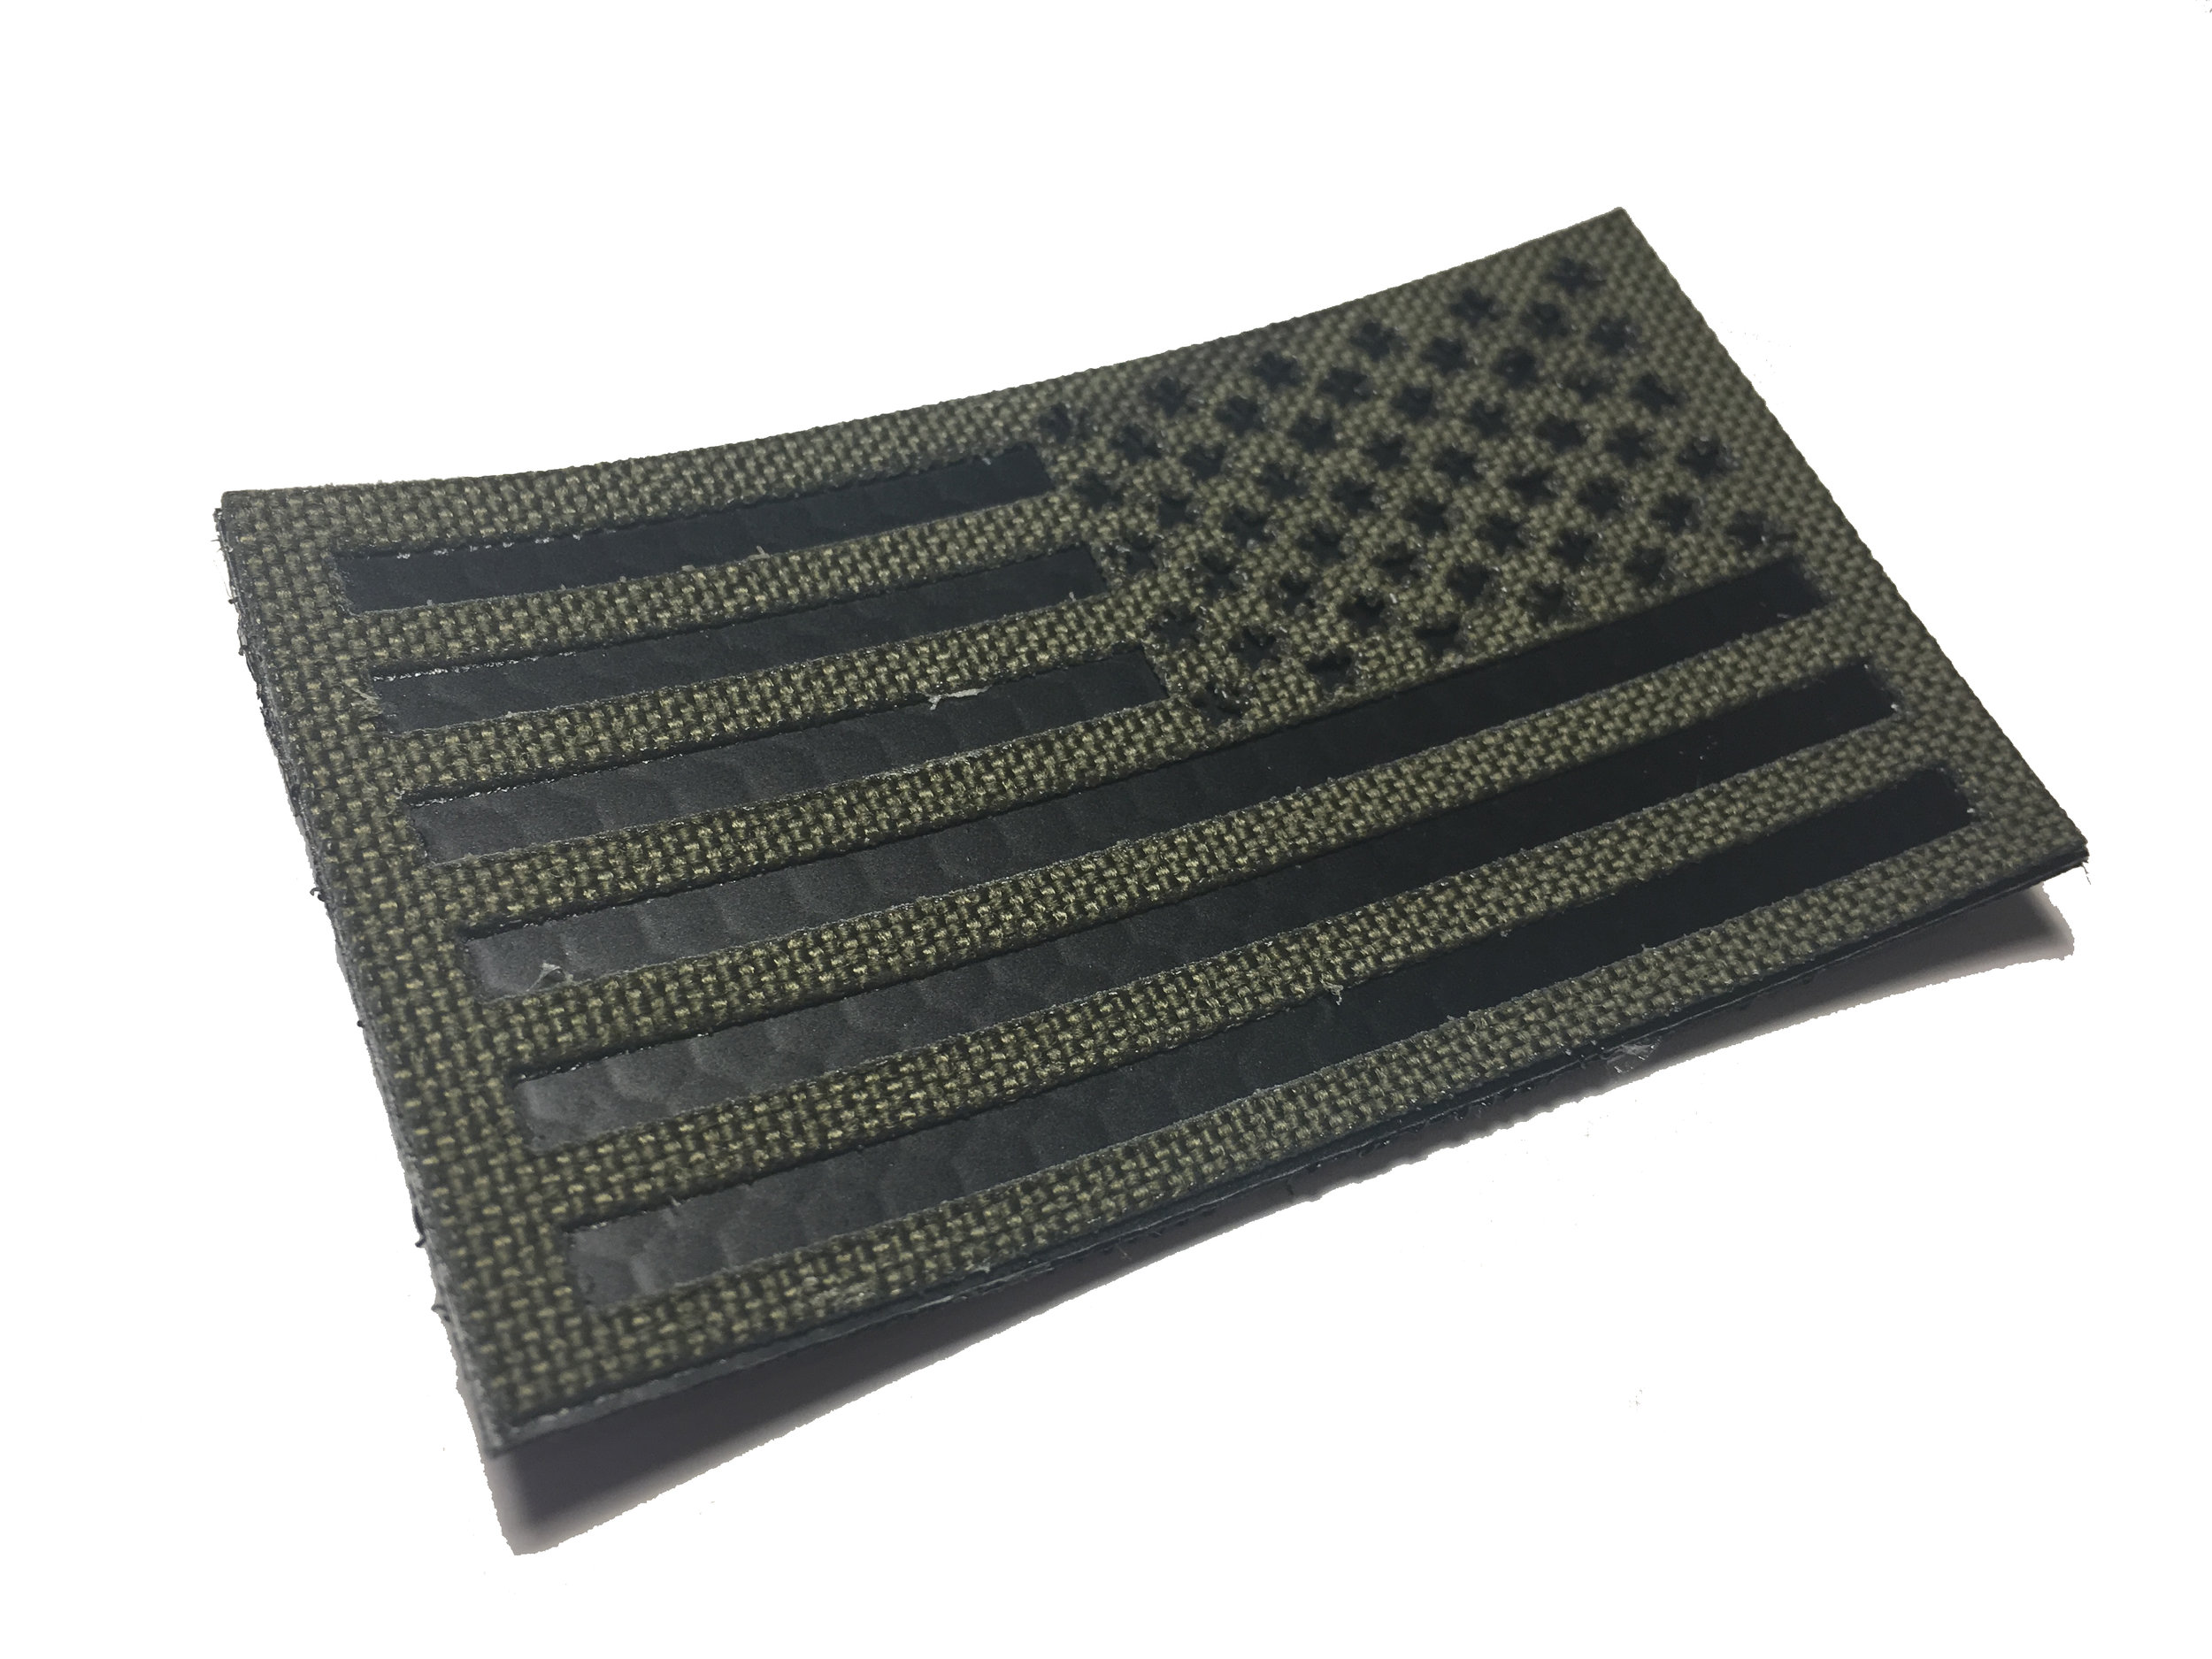 Reversed Infrared reflective OD green IR US Flag Patch 3.5x2" Special Forces 